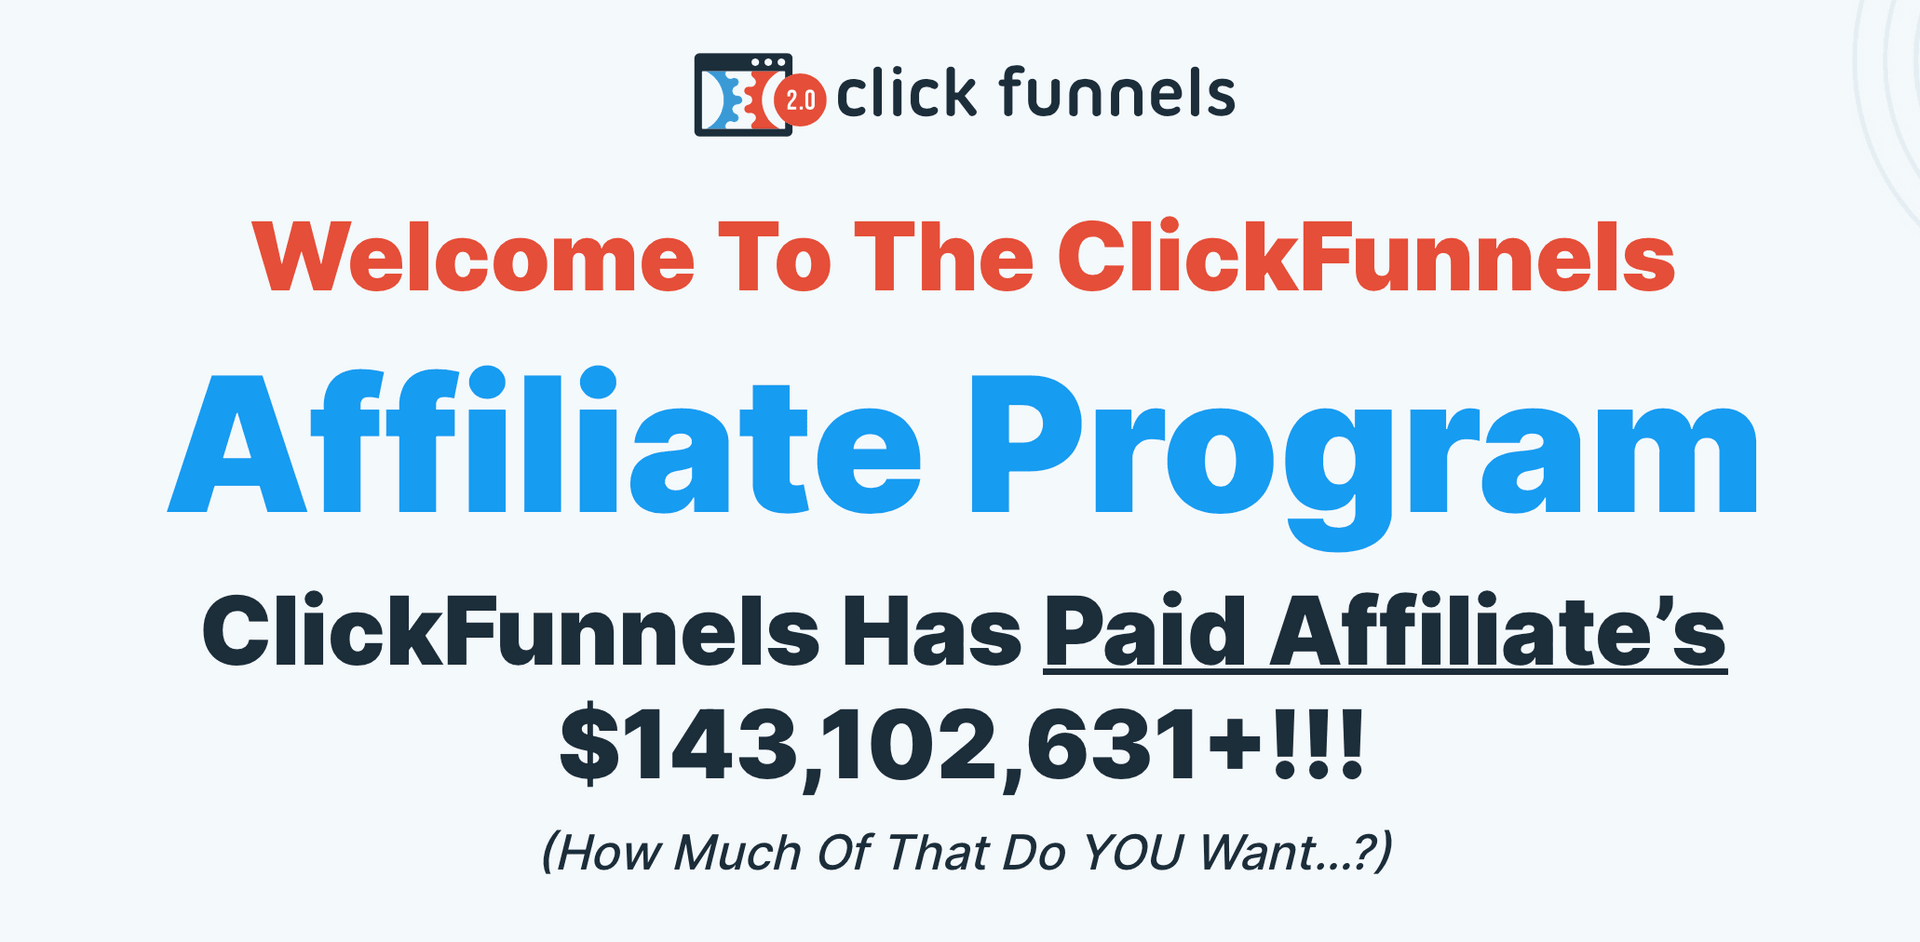 ClickFunnels 14-Day Trial: Promote the FREE 14-day trial, and get 30% recurring commission each month the person continues their ClickFunnels membership. (All Clickfunnels account levels are commissionable!